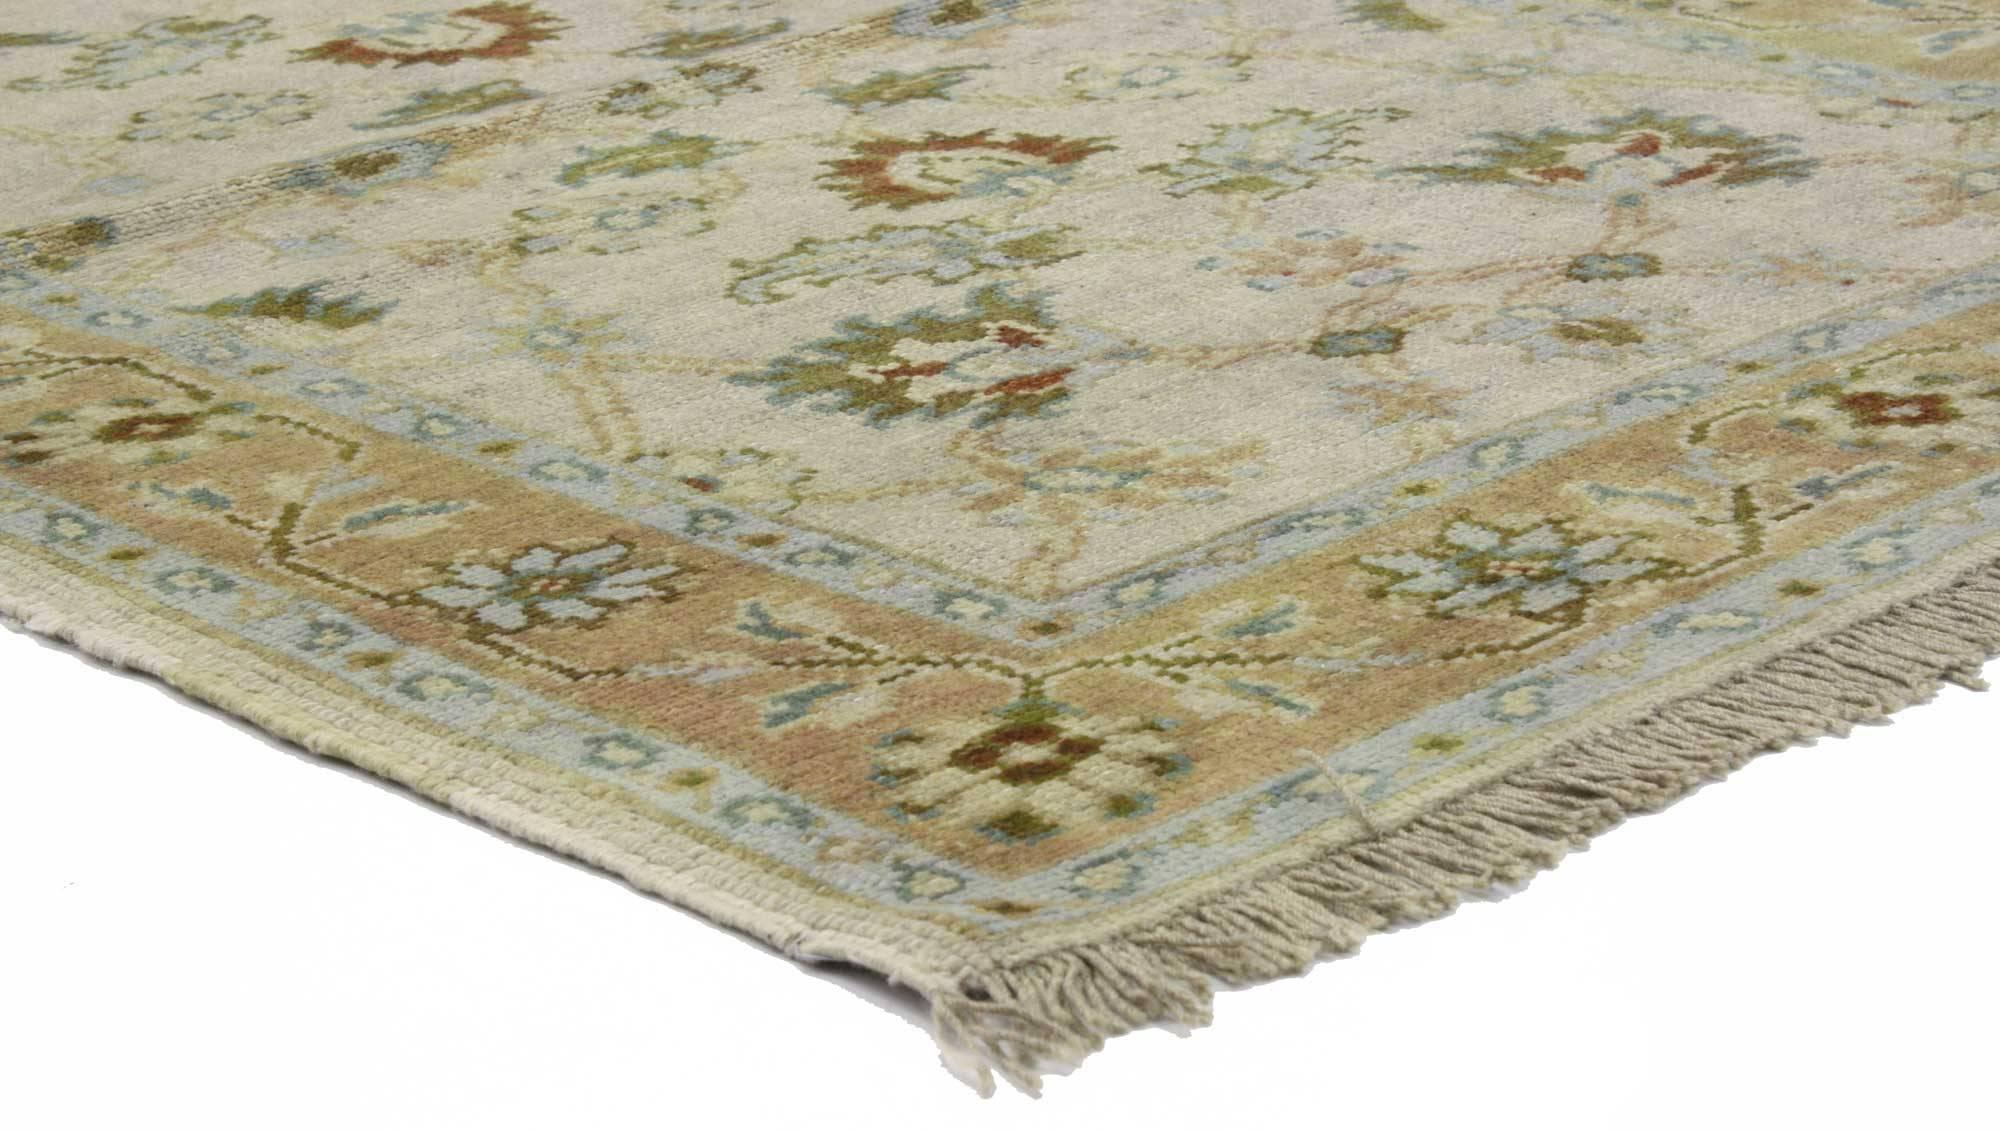 74639 vintage Persian style Garden rug, Accent rug with Georgian Queen Anne style. This hand knotted wool vintage Persian style Indian accent rug features an all-over floral lattice pattern composed of blooming lotus palmettes, tulips, lilies,